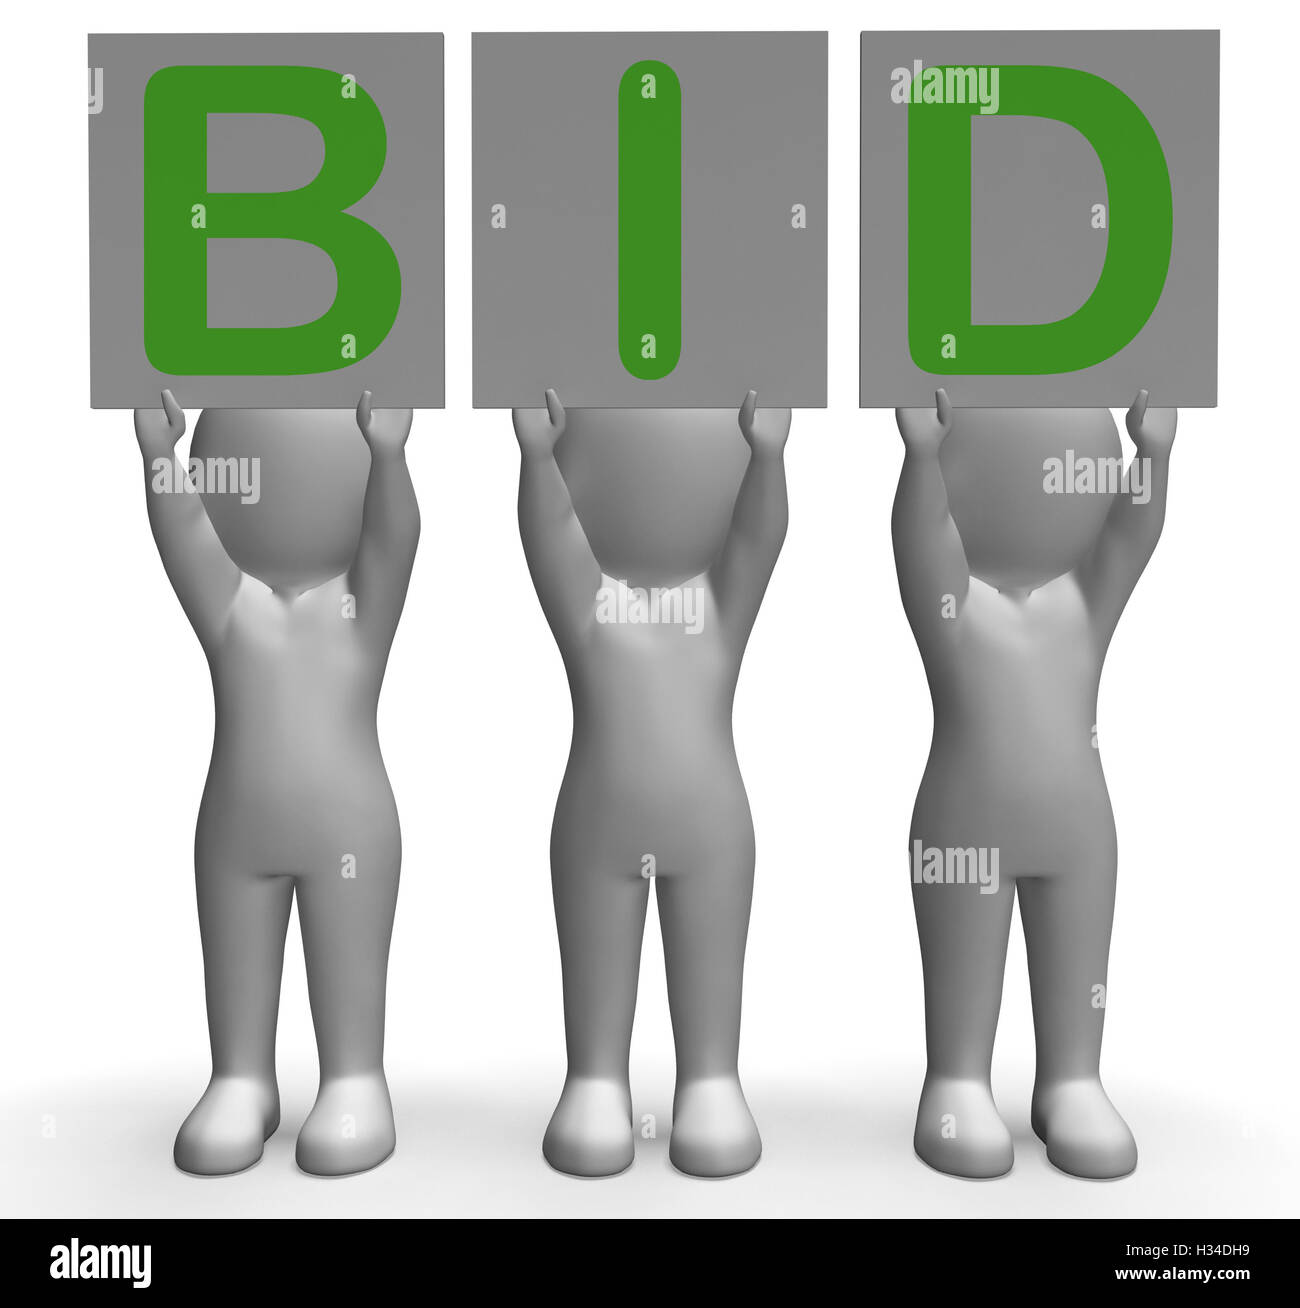 Bid Banners Shows Auction Bidder And Auctioning Stock Photo